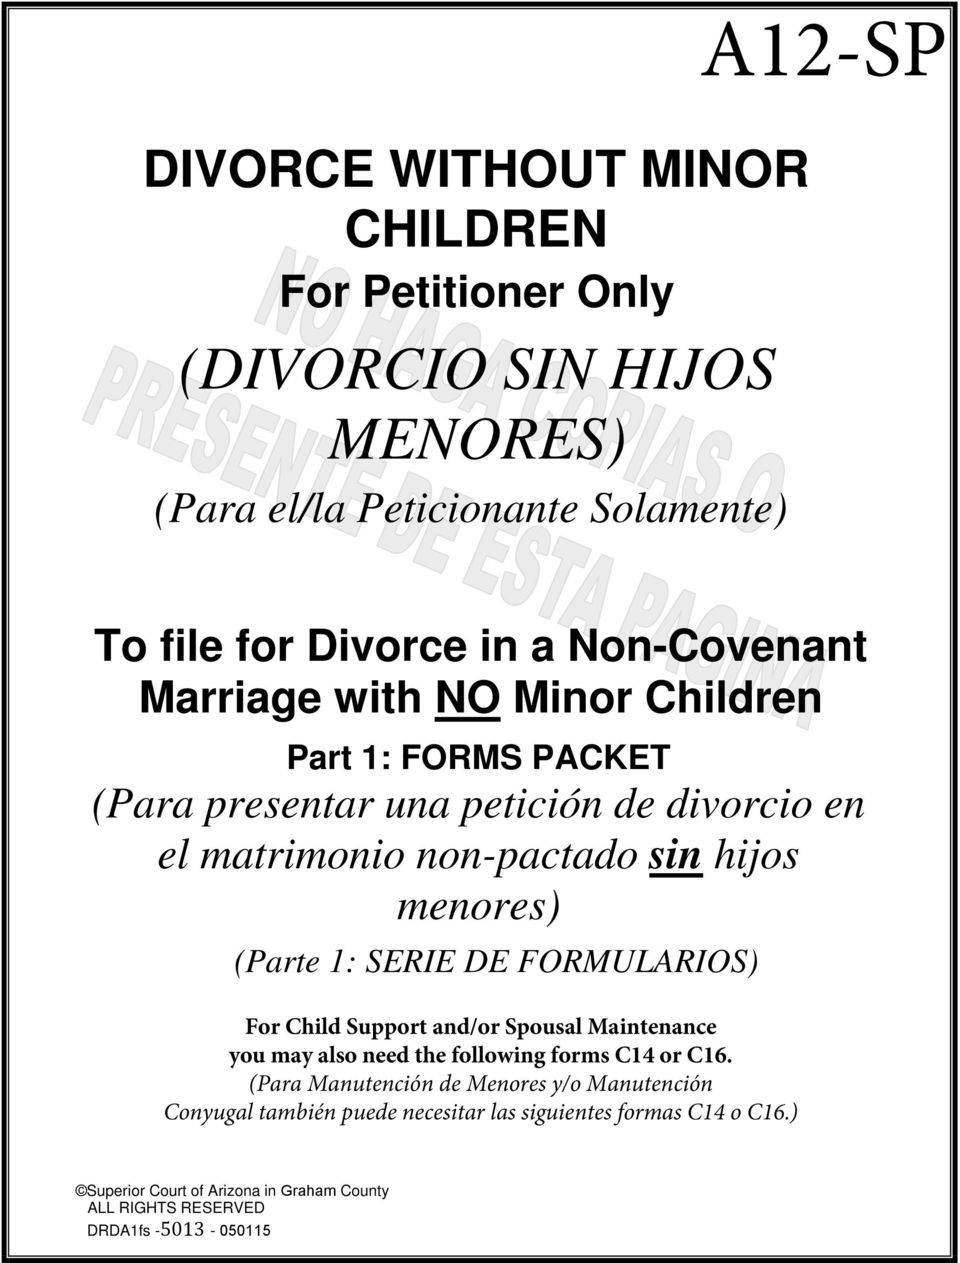 menores) (Parte 1: SERIE DE FORMULARIOS) For Child Support and/or Spousal Maintenance you may also need the following forms C14 or C16.